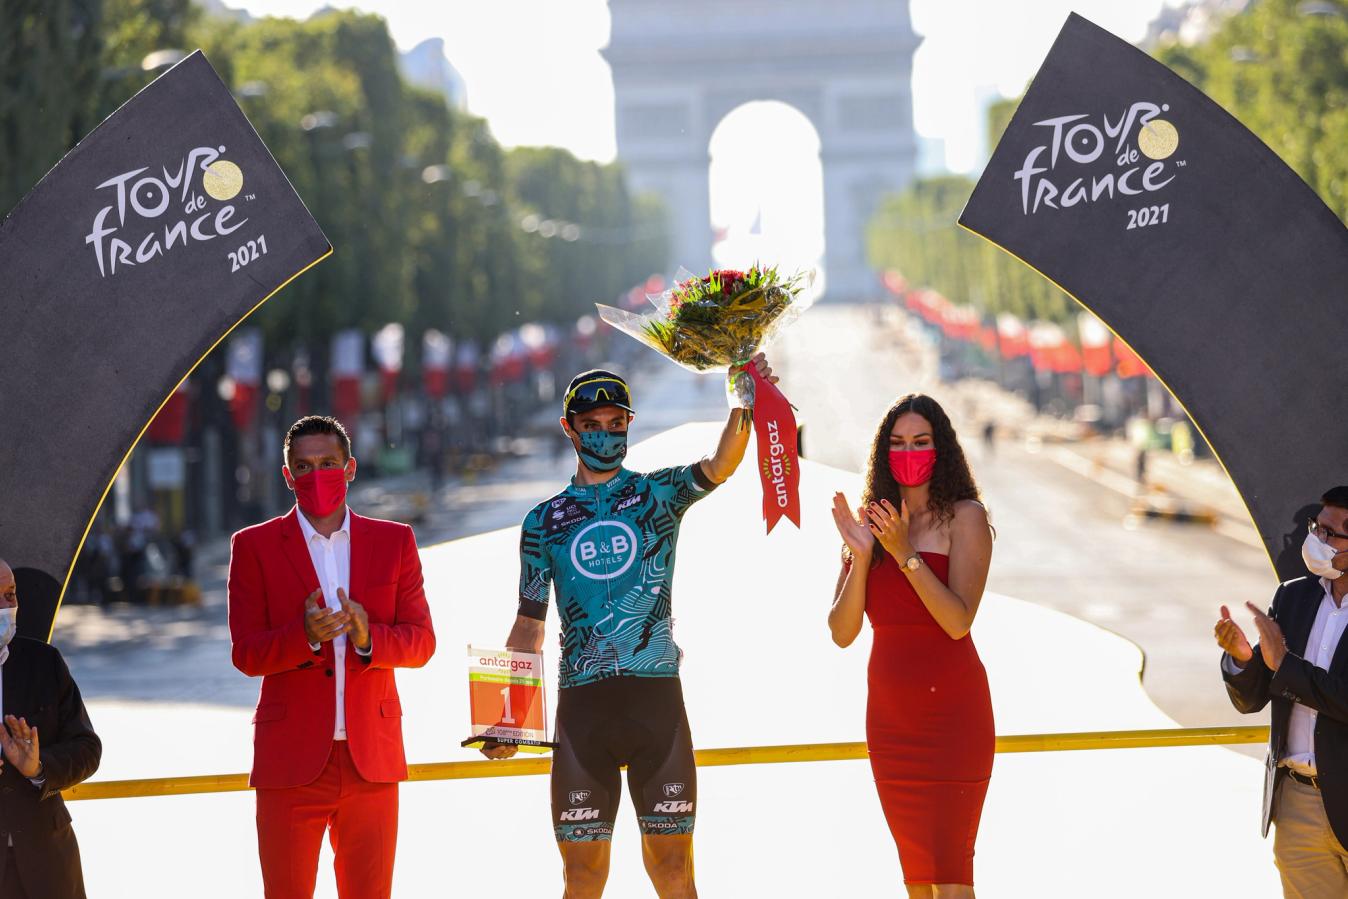 On Grand Tour debut at the 2021 Tour de France, Franck Bonnamour was awarded the overall combativity award